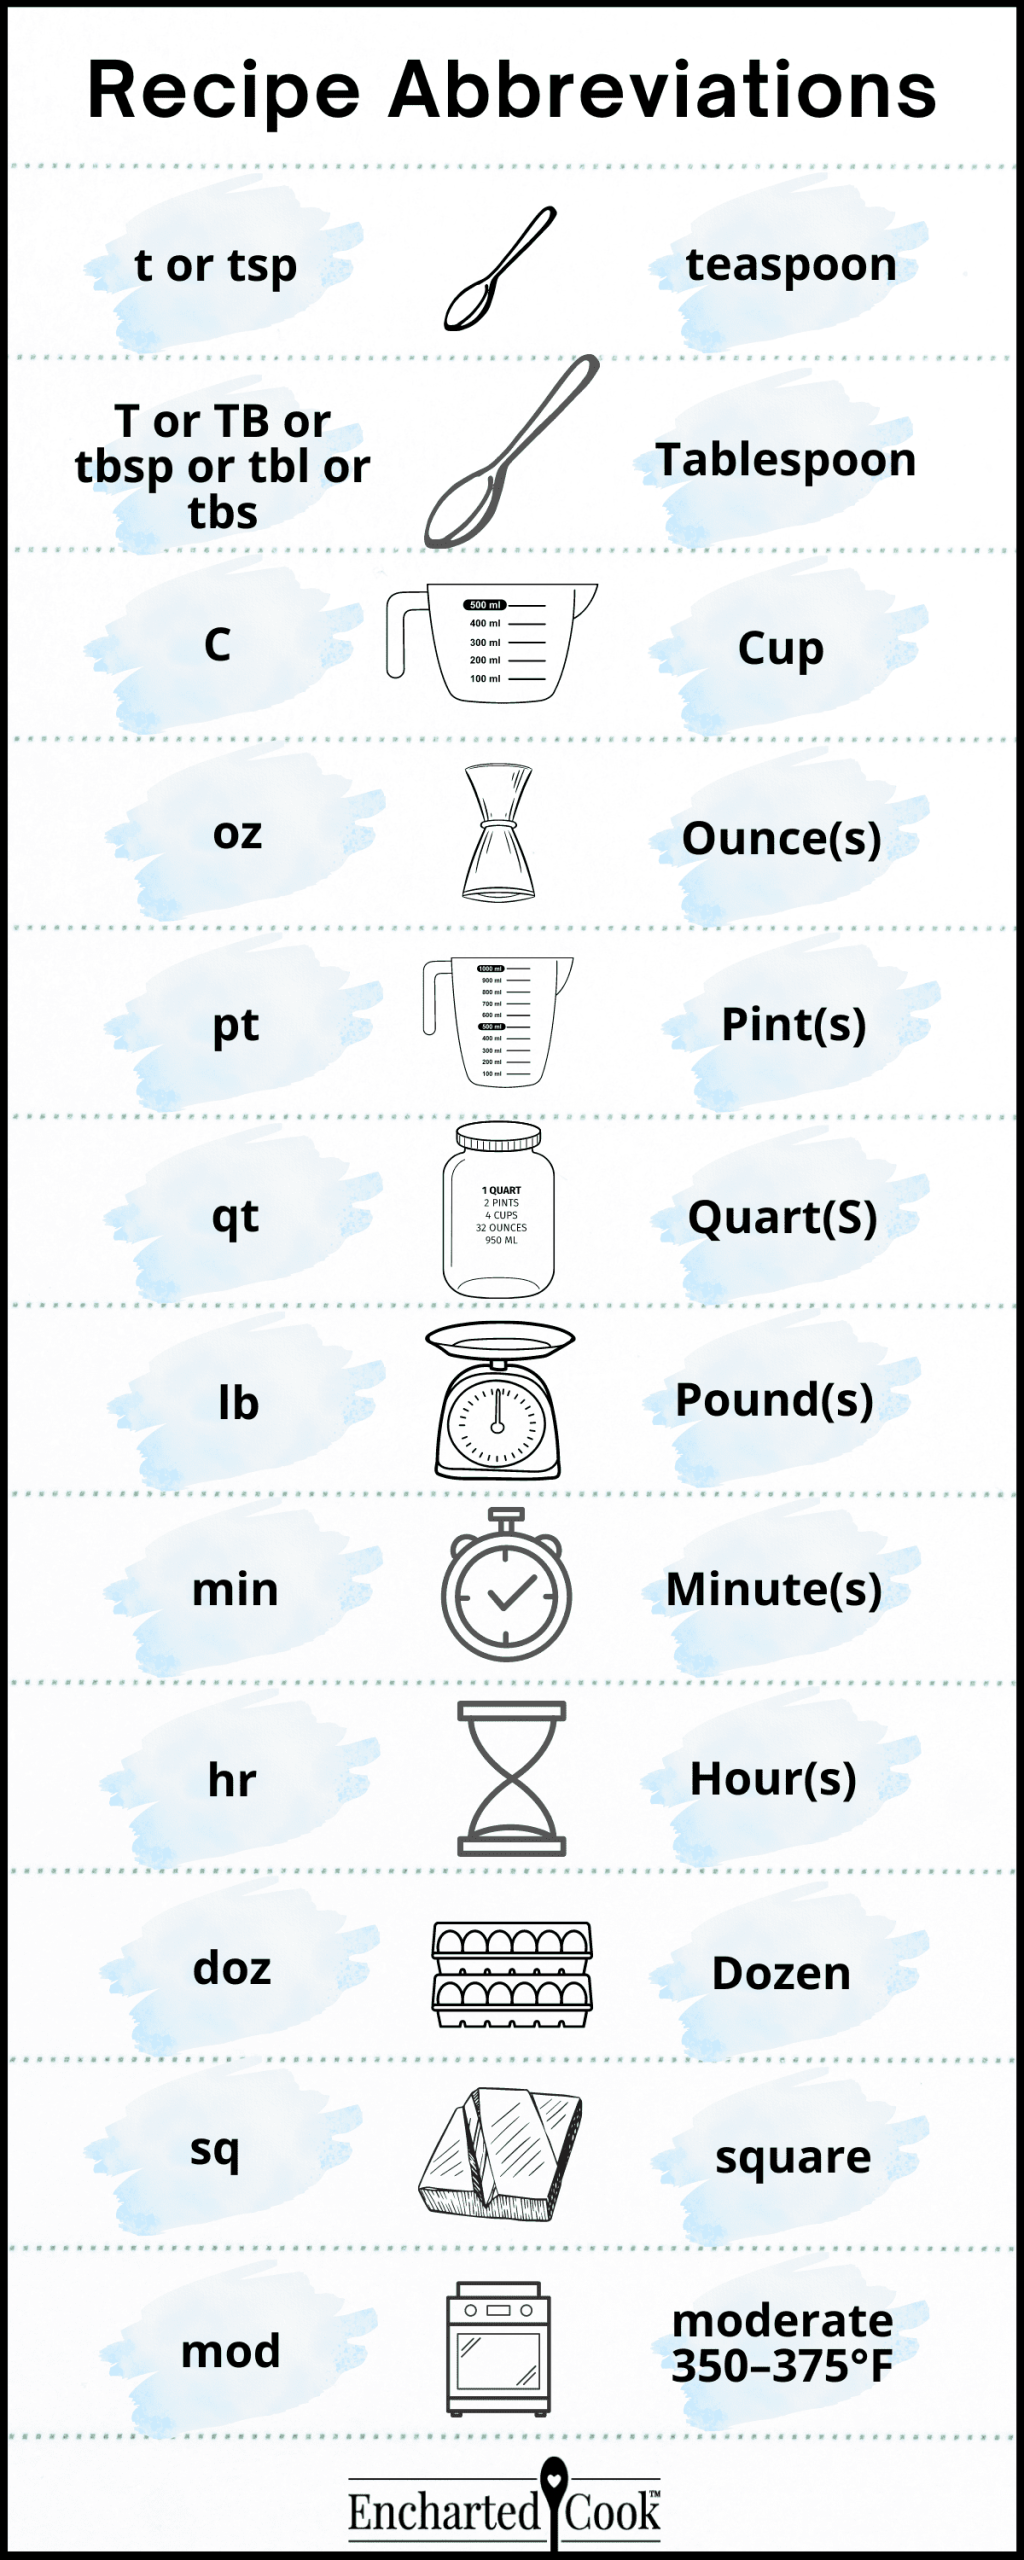 Picture of: Recipe Abbreviations  Encharted Cook